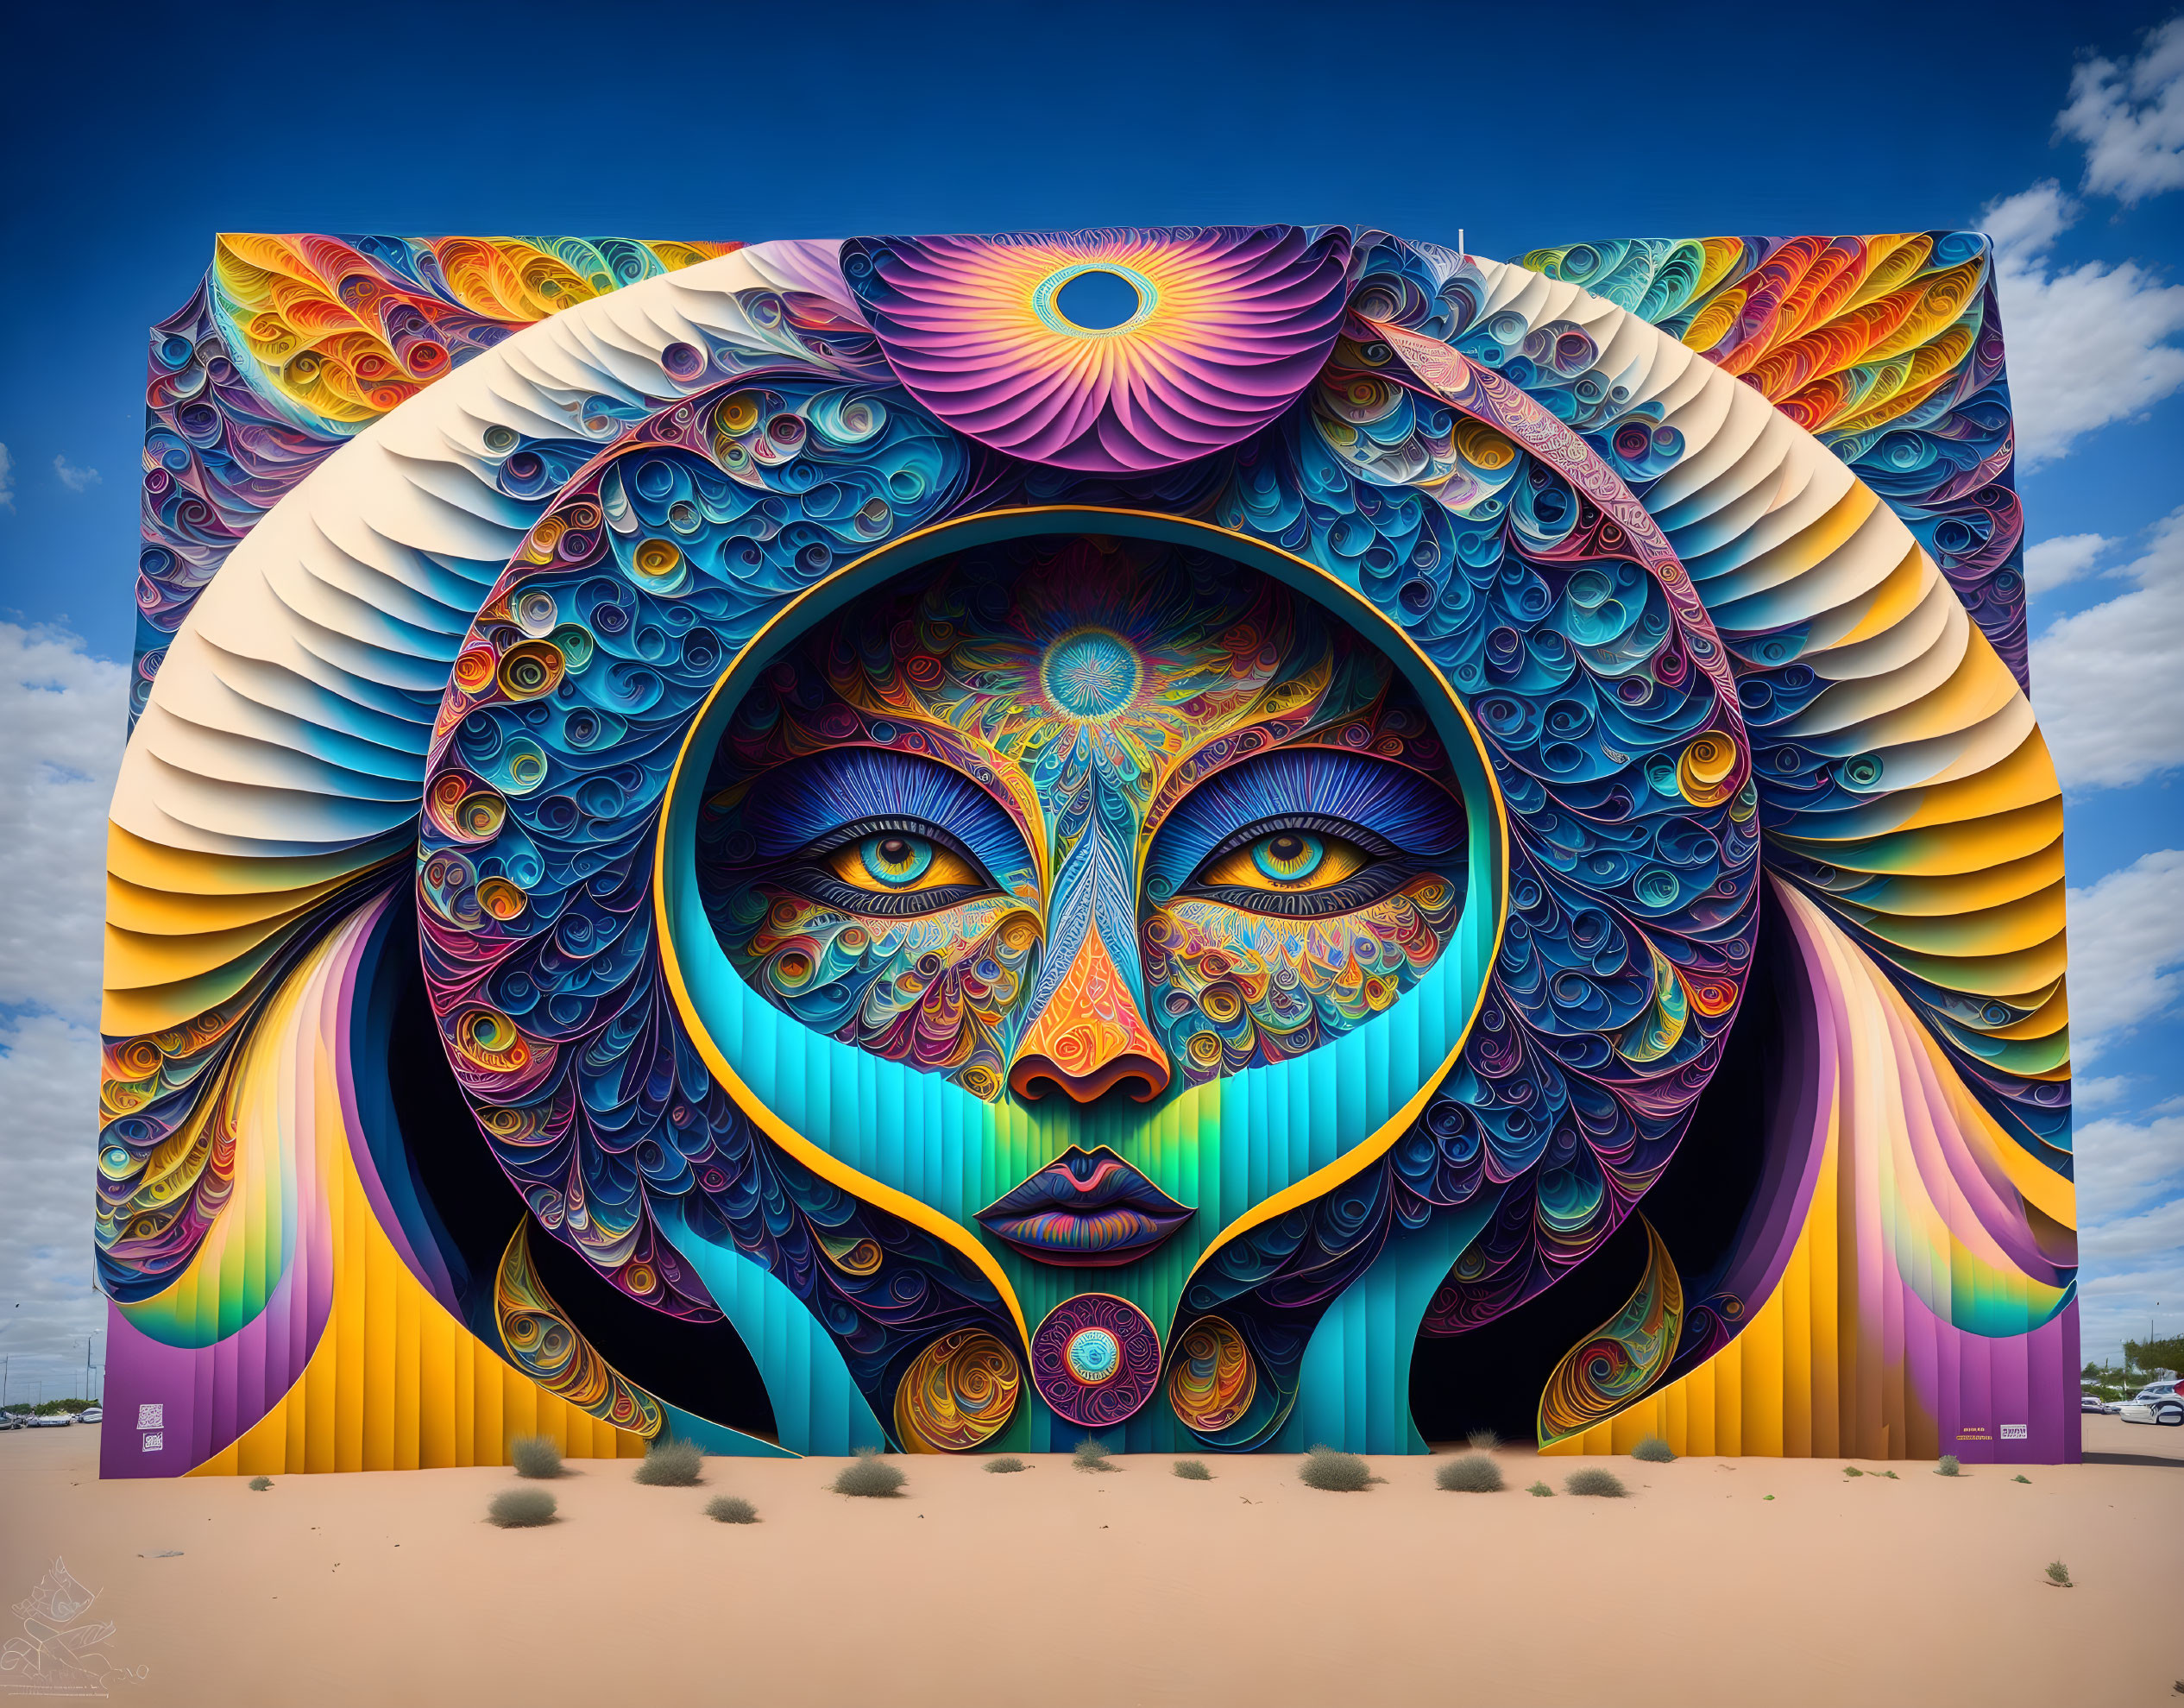 Symmetrical psychedelic face mural with swirling patterns under blue sky